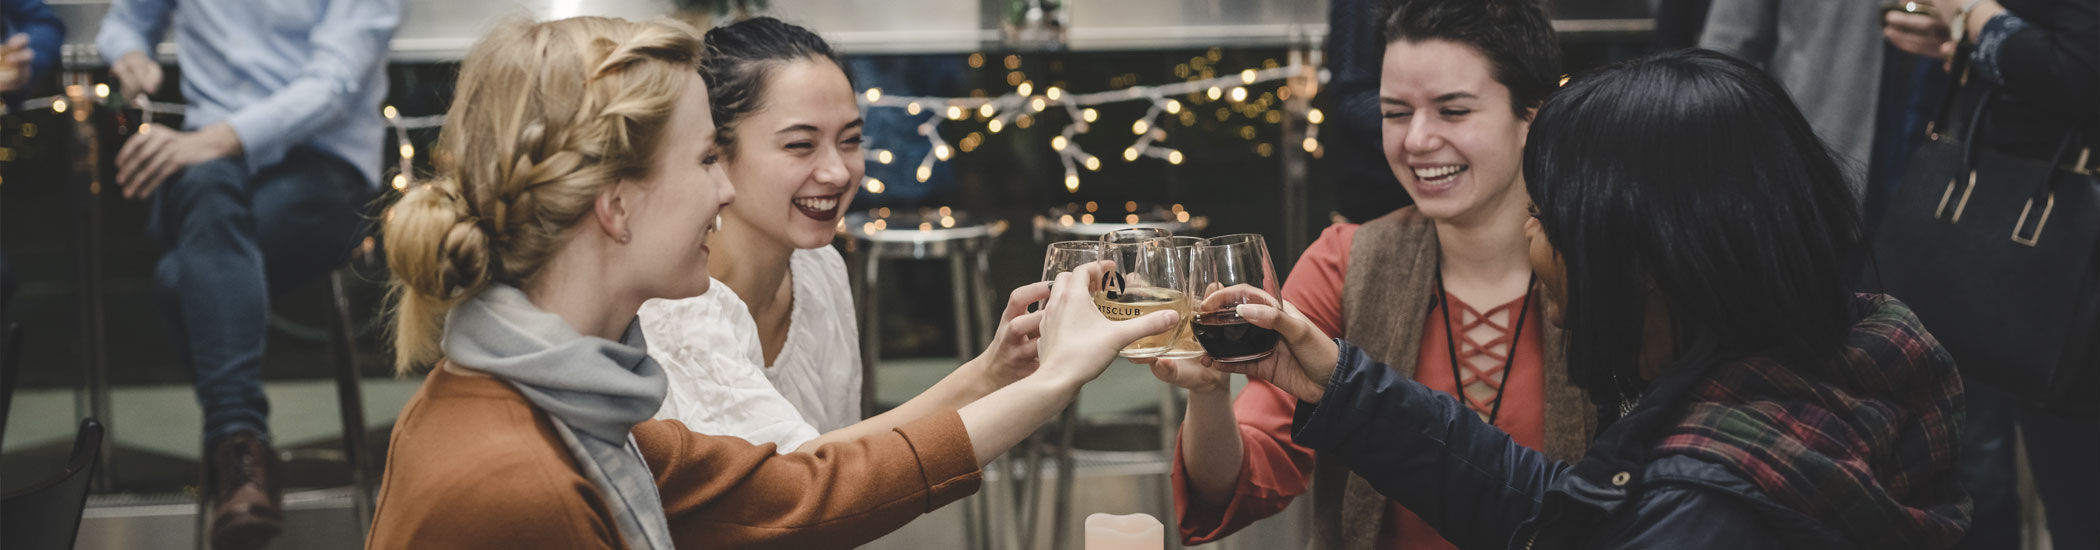 Photo of four smiling people toasting with wine glasses.